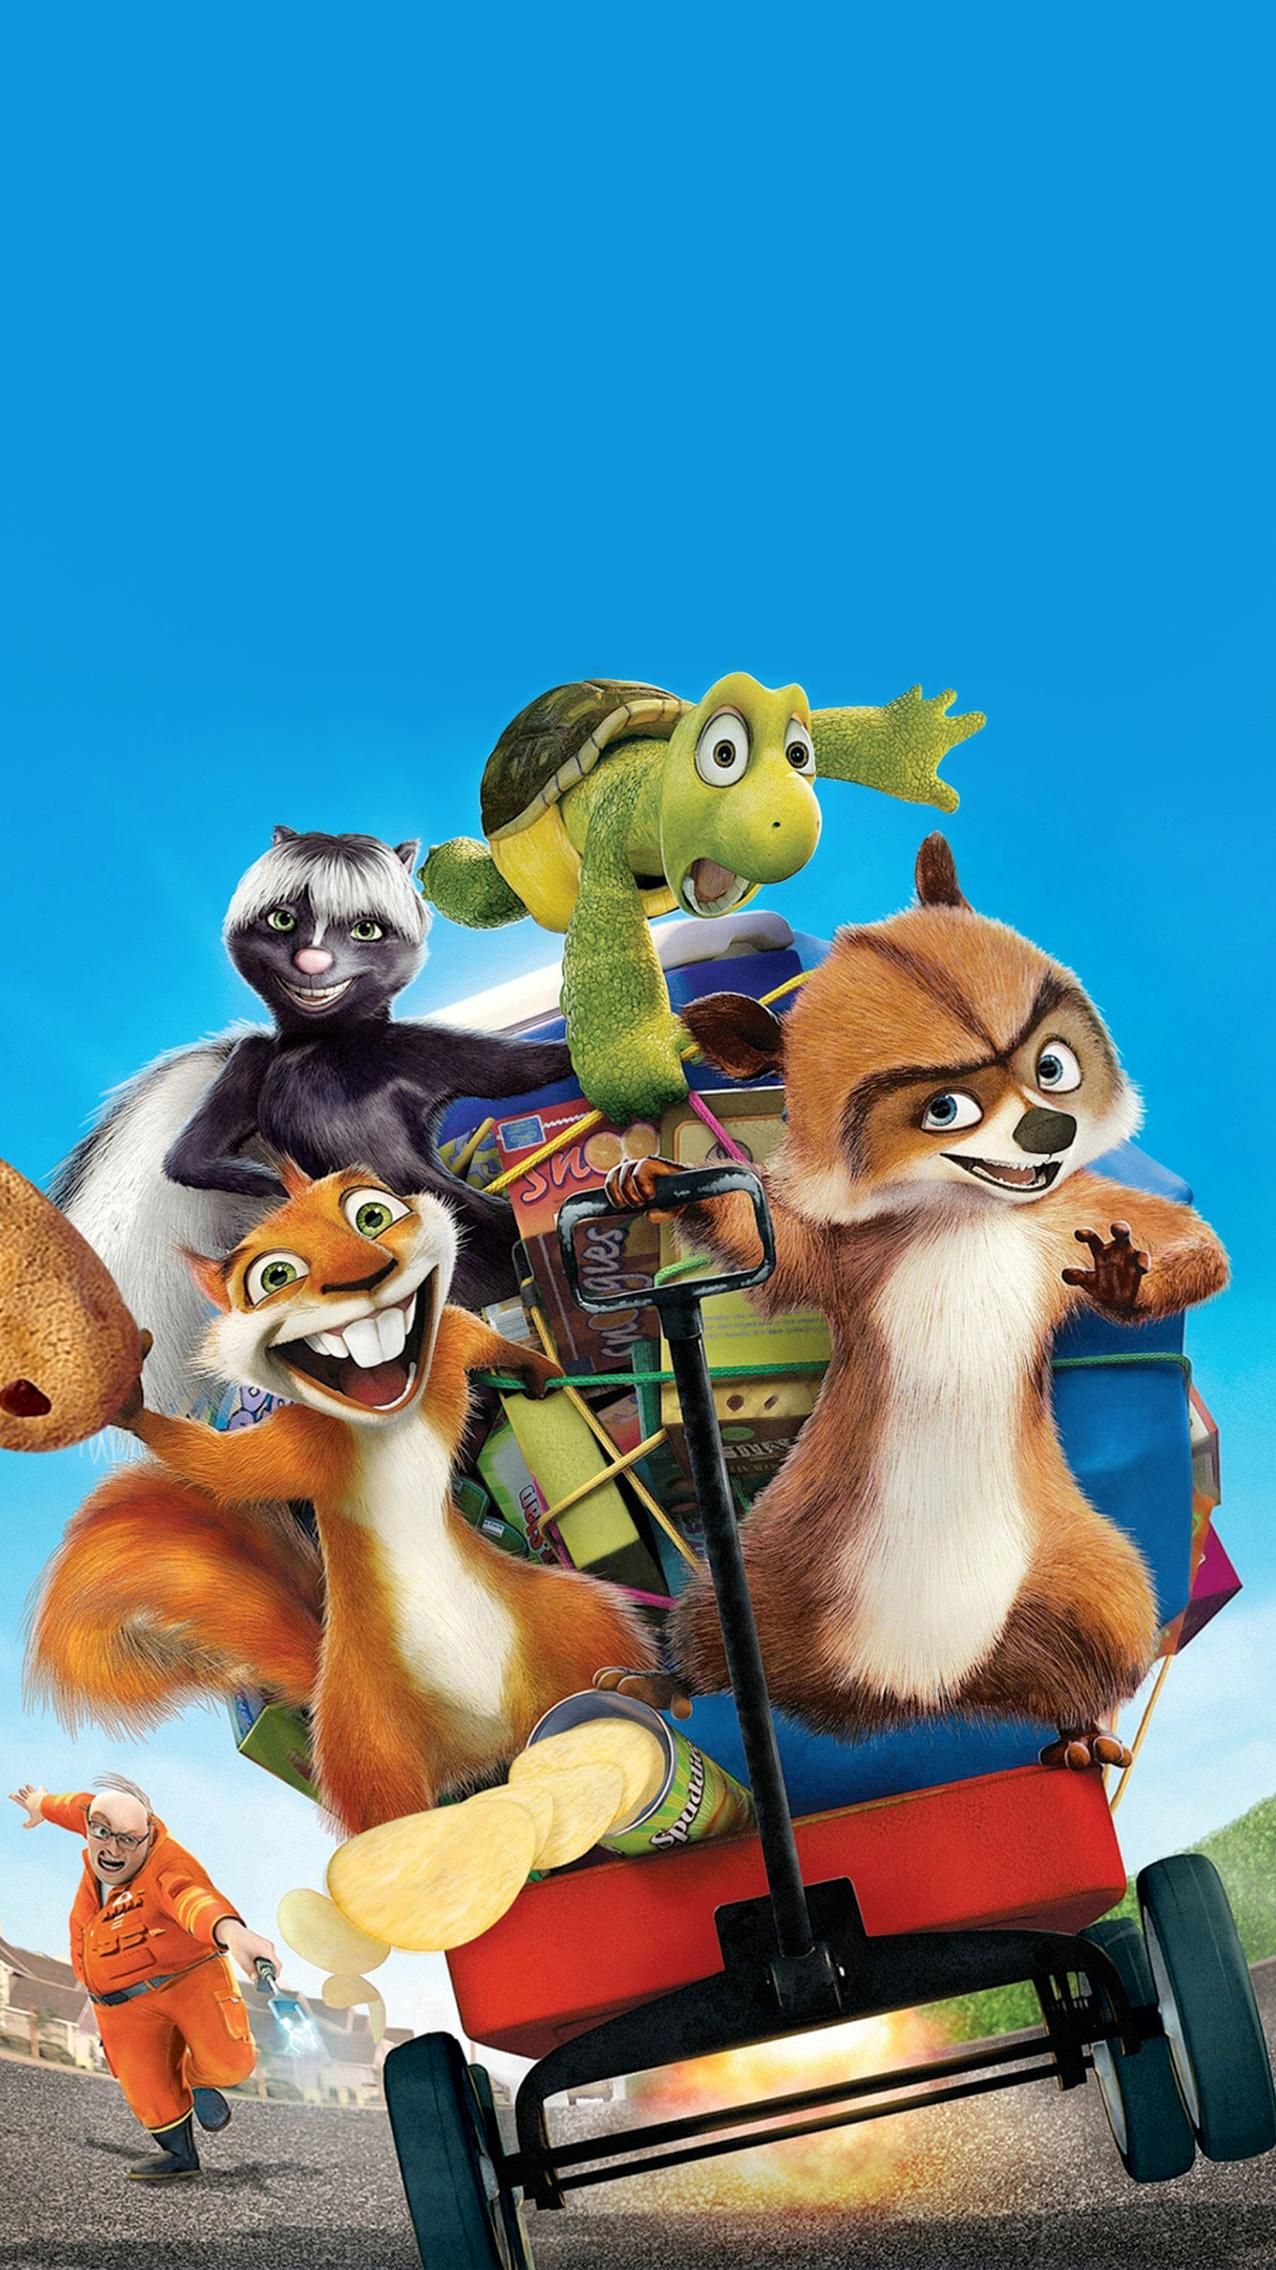 Over The Hedge Wallpapers